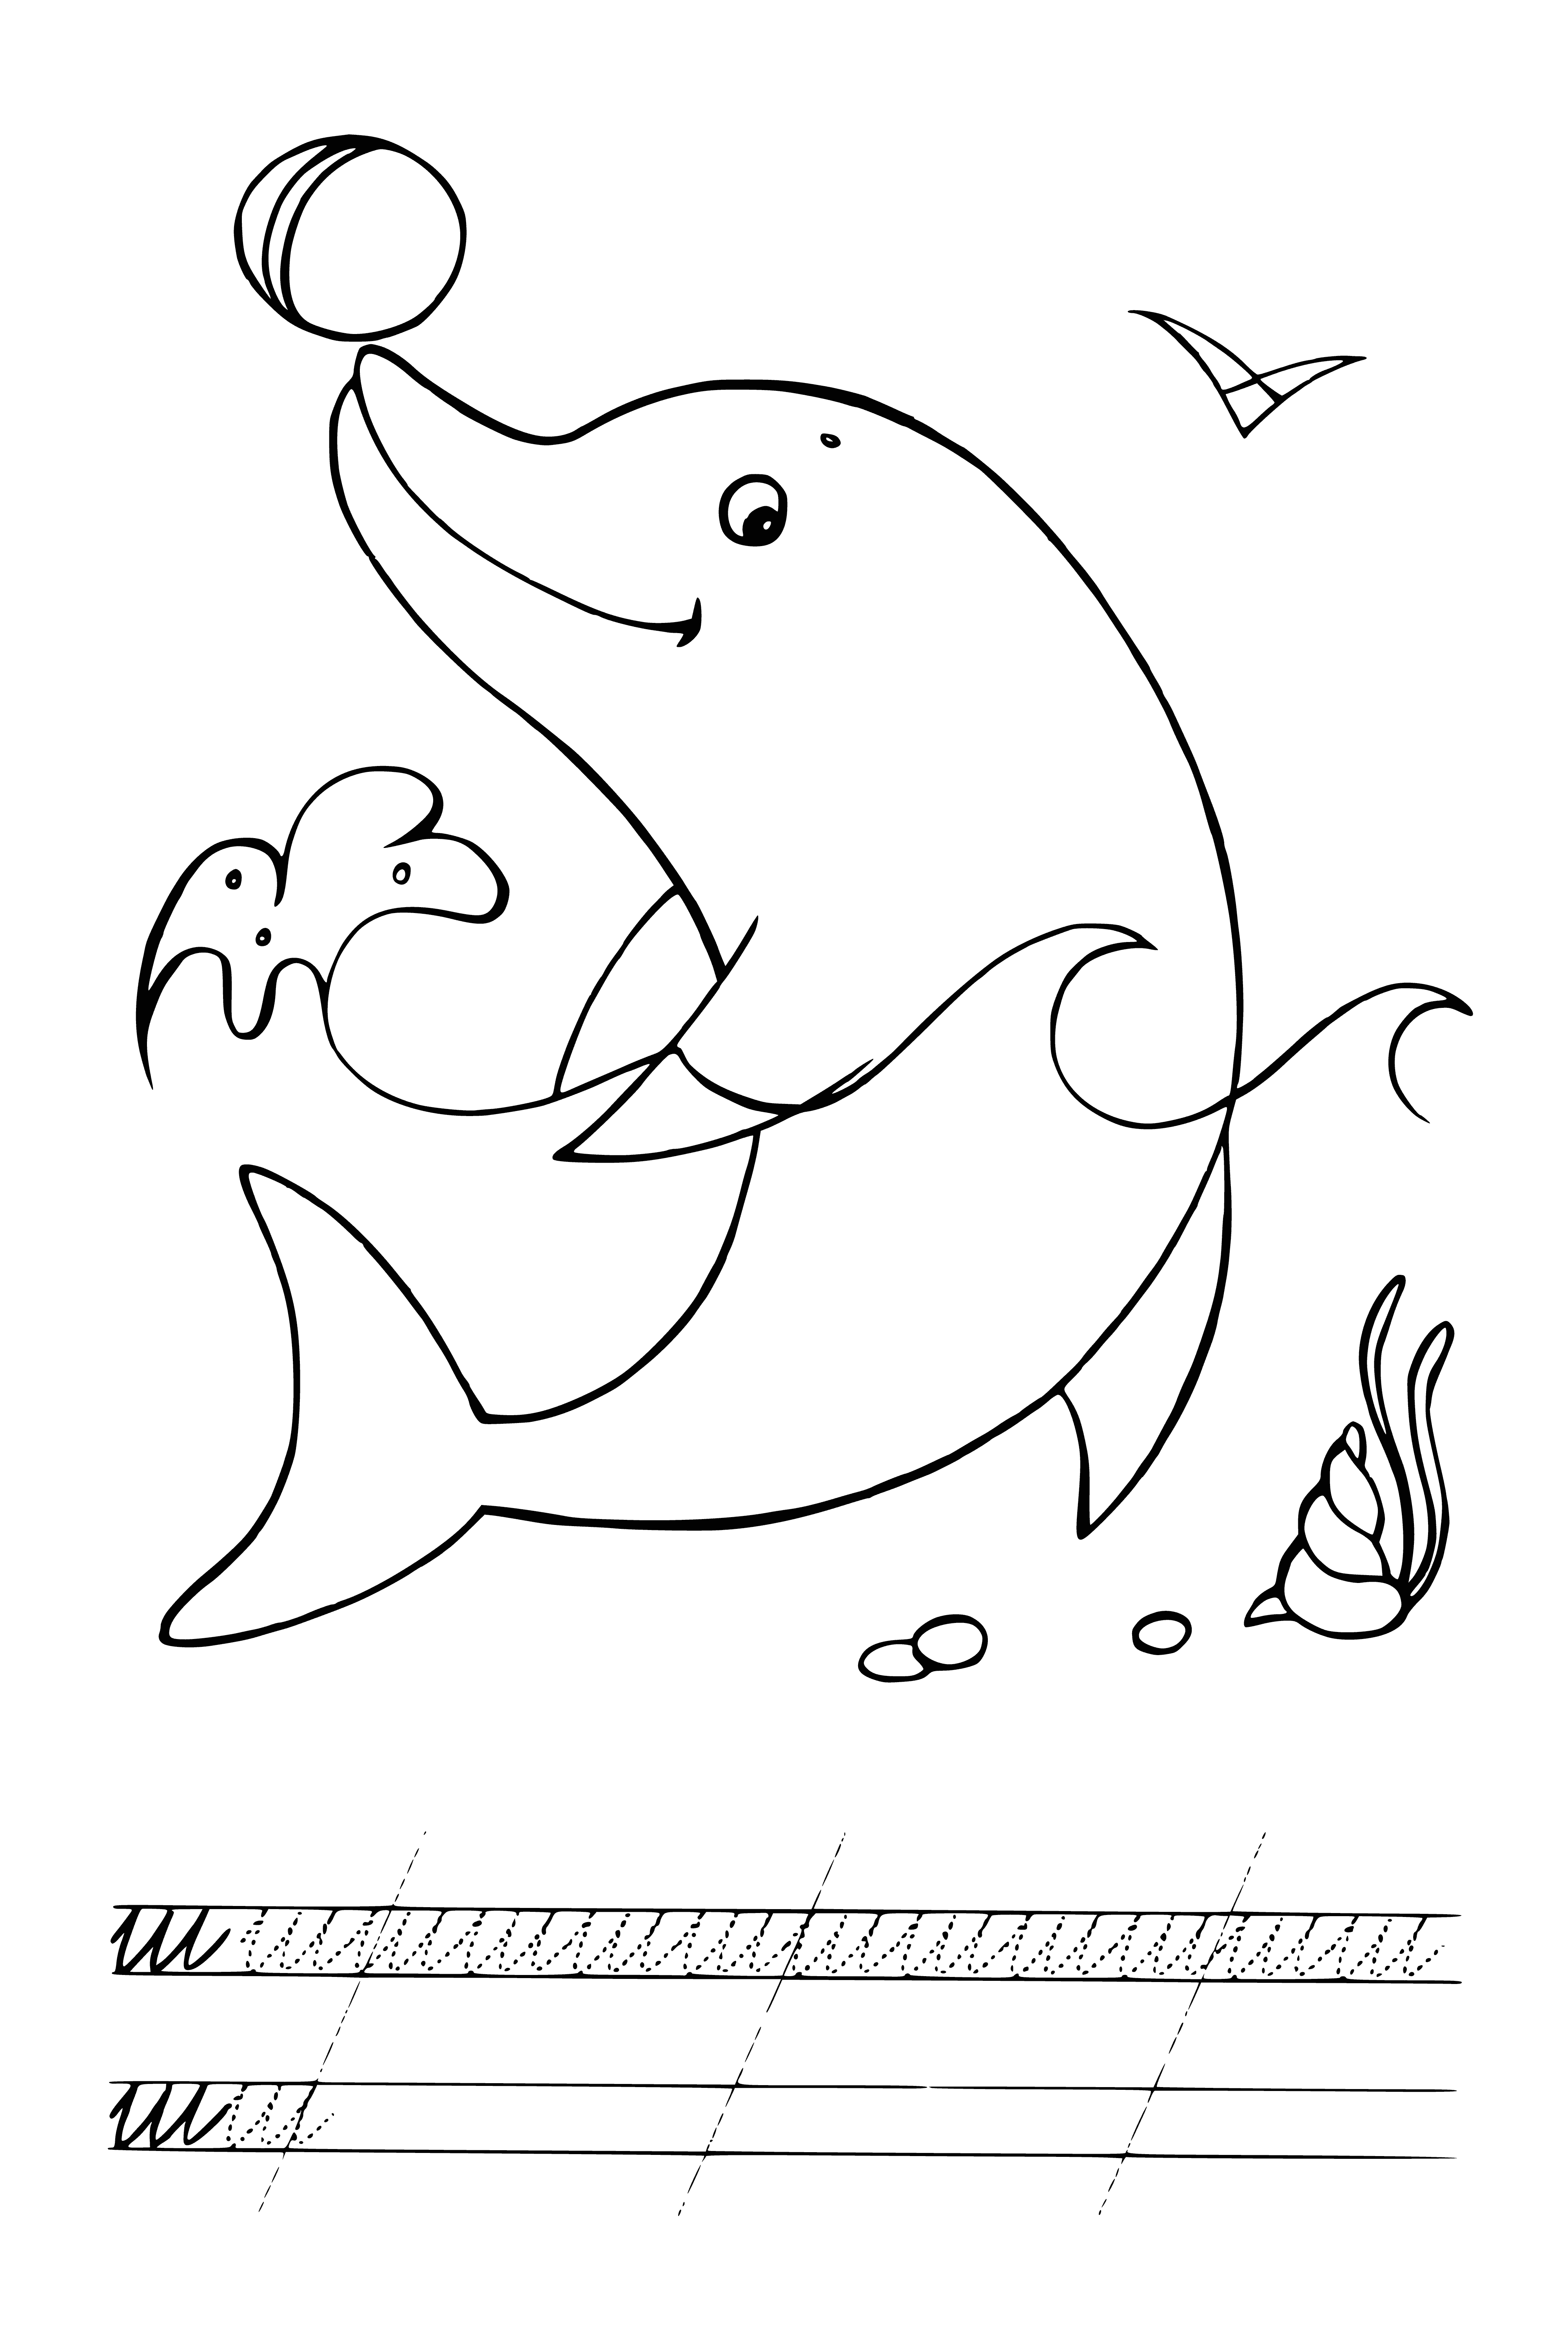 coloring page: The dolphin happily swims in the ocean with a sleek, dark body, large flippers, and long, powerful tail. #wildlife #dolphins